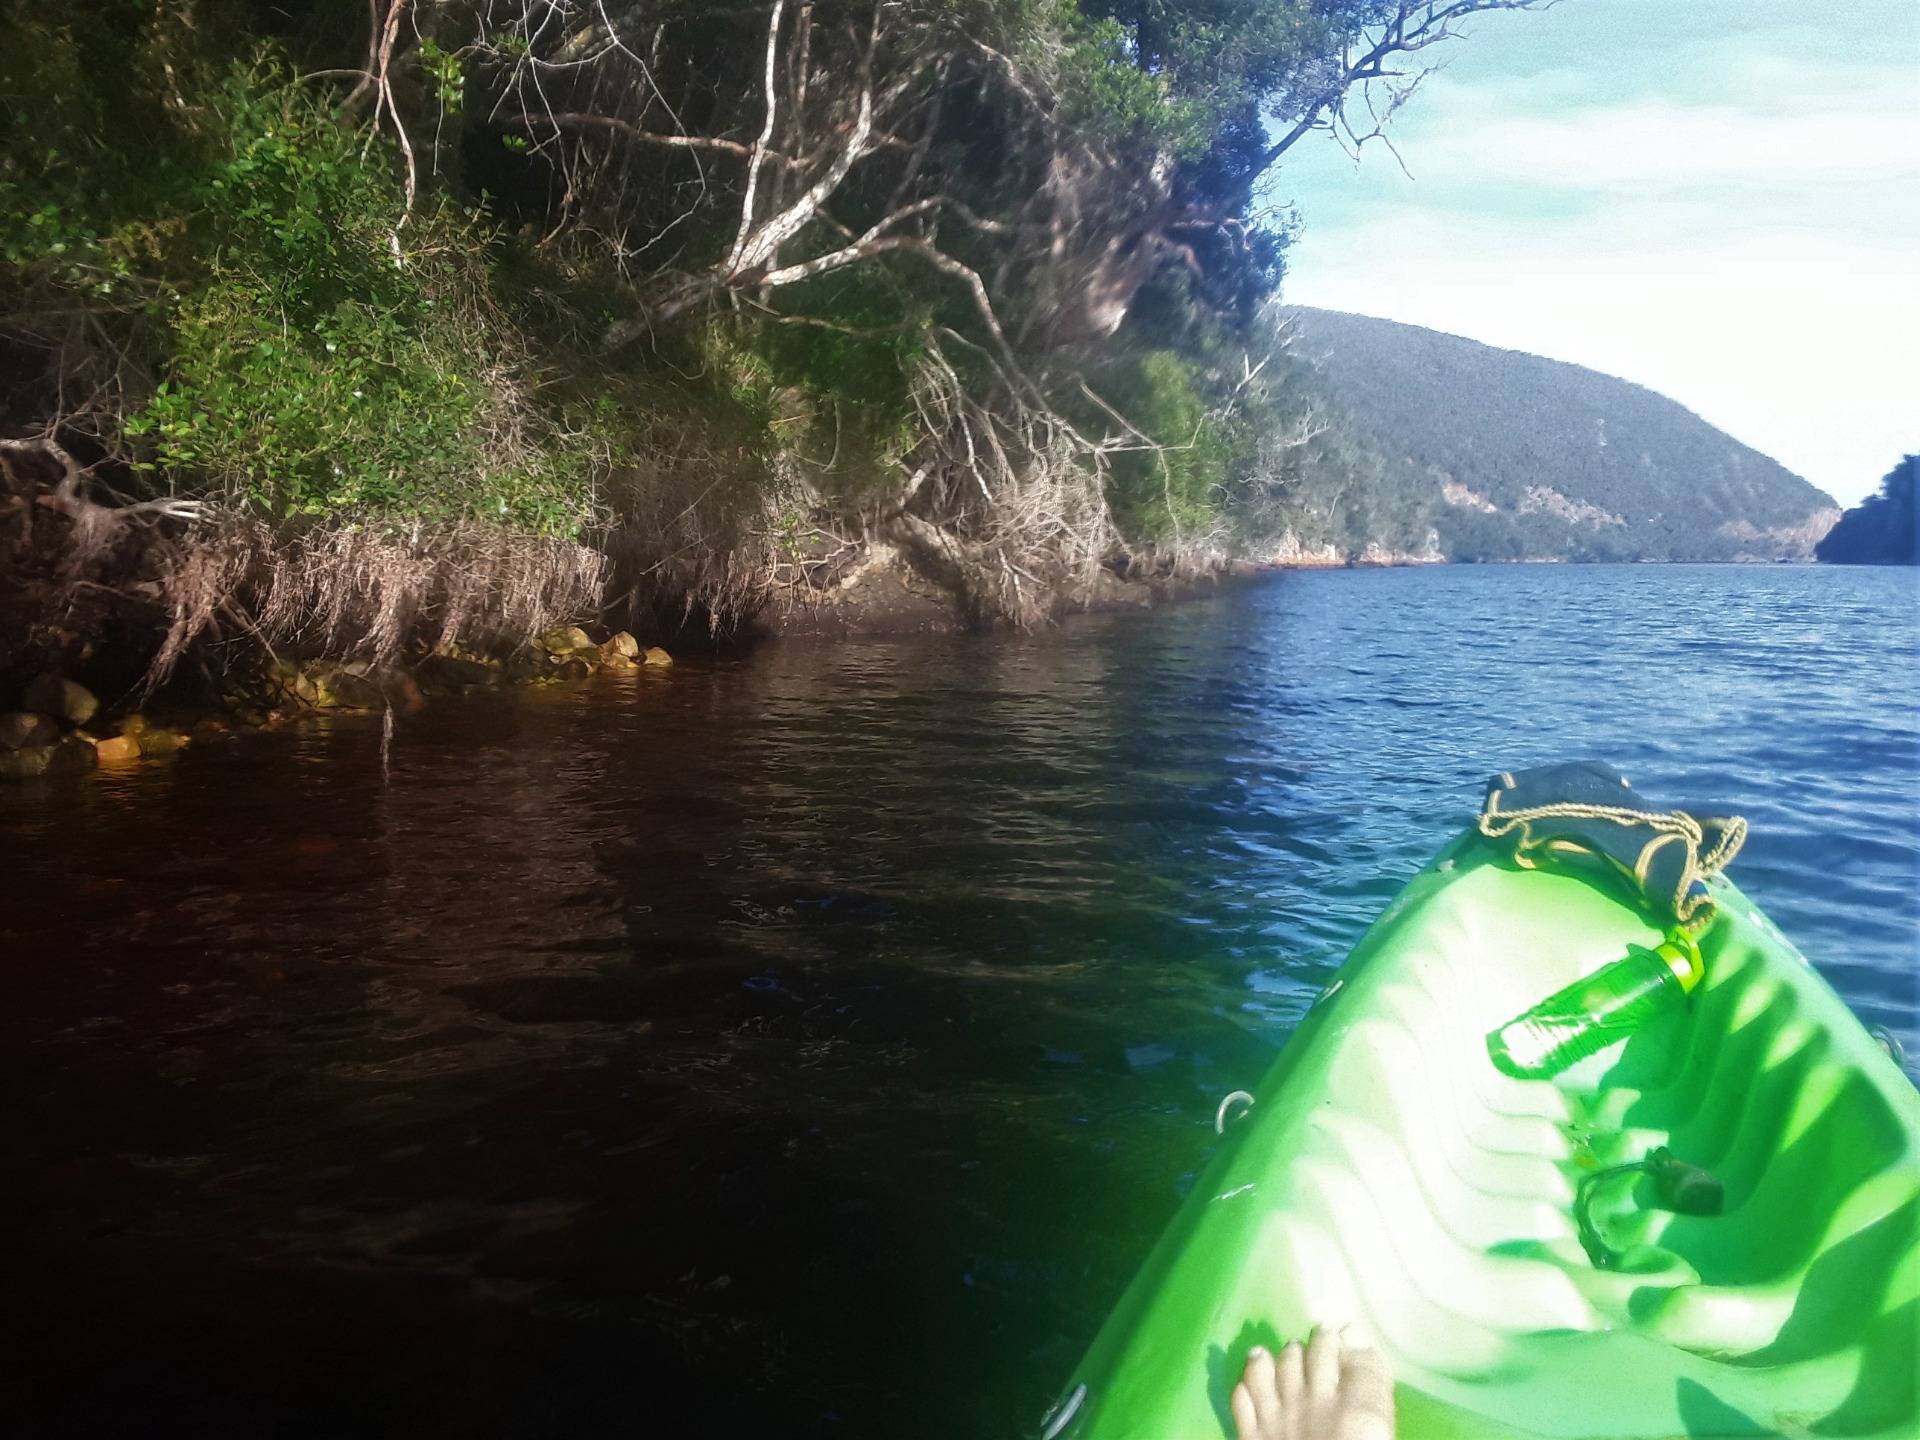 Paddling back toward the coast down river with epic vegetation on the cliff face either side of the river